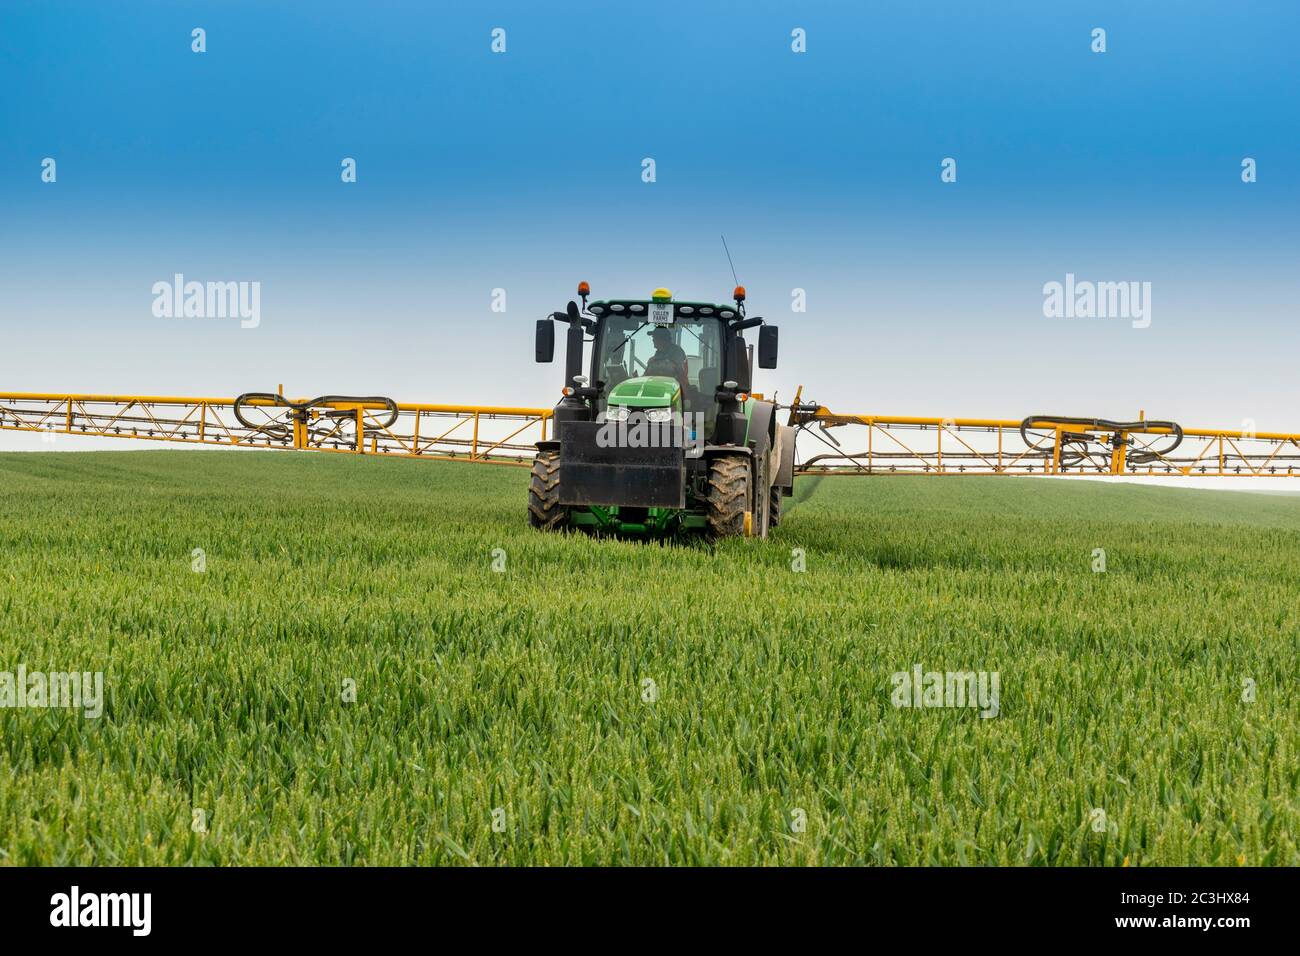 AGRICULTURE TRACTOR AND LARGE YELLOW CROP SPRAYER WITH ACTIVE SPRAY ON A LARGE FIELD OF WHEAT Stock Photo